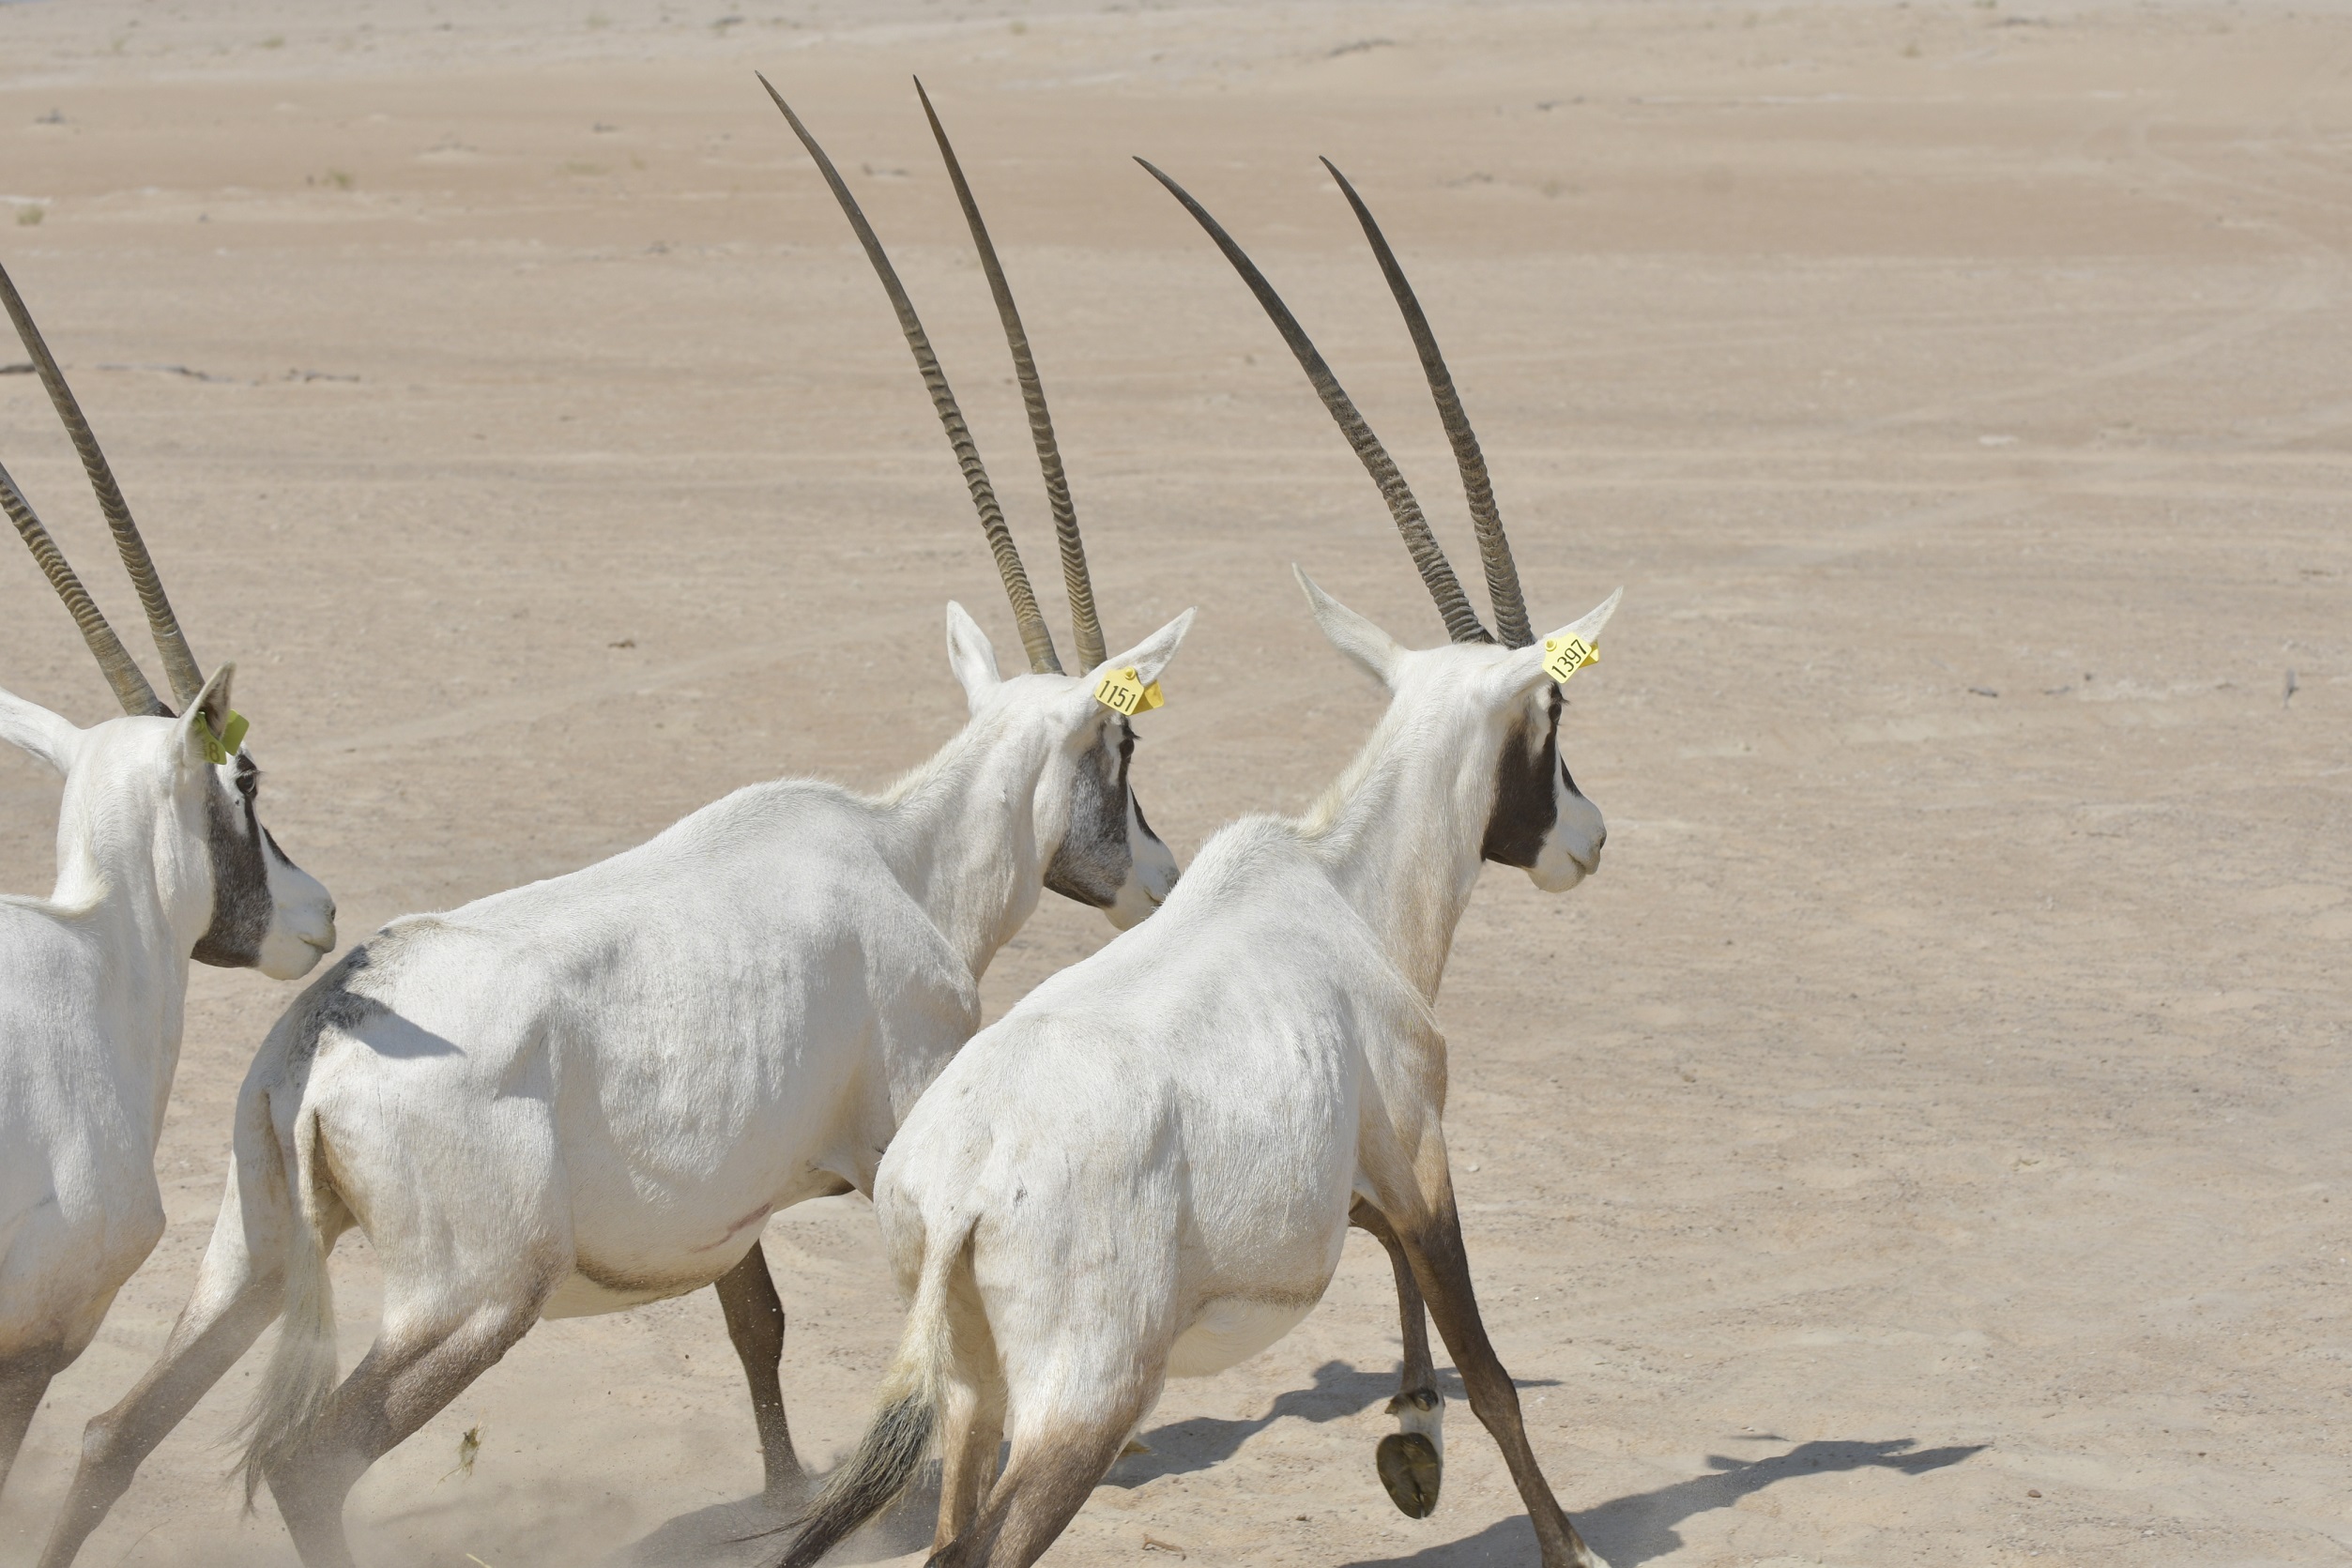 Image for Under The Directions Of Hamdan Bin Zayed Environment Agency – Abu Dhabi Releases A New Group Of Arabian Oryx In The Houbara Protected Area